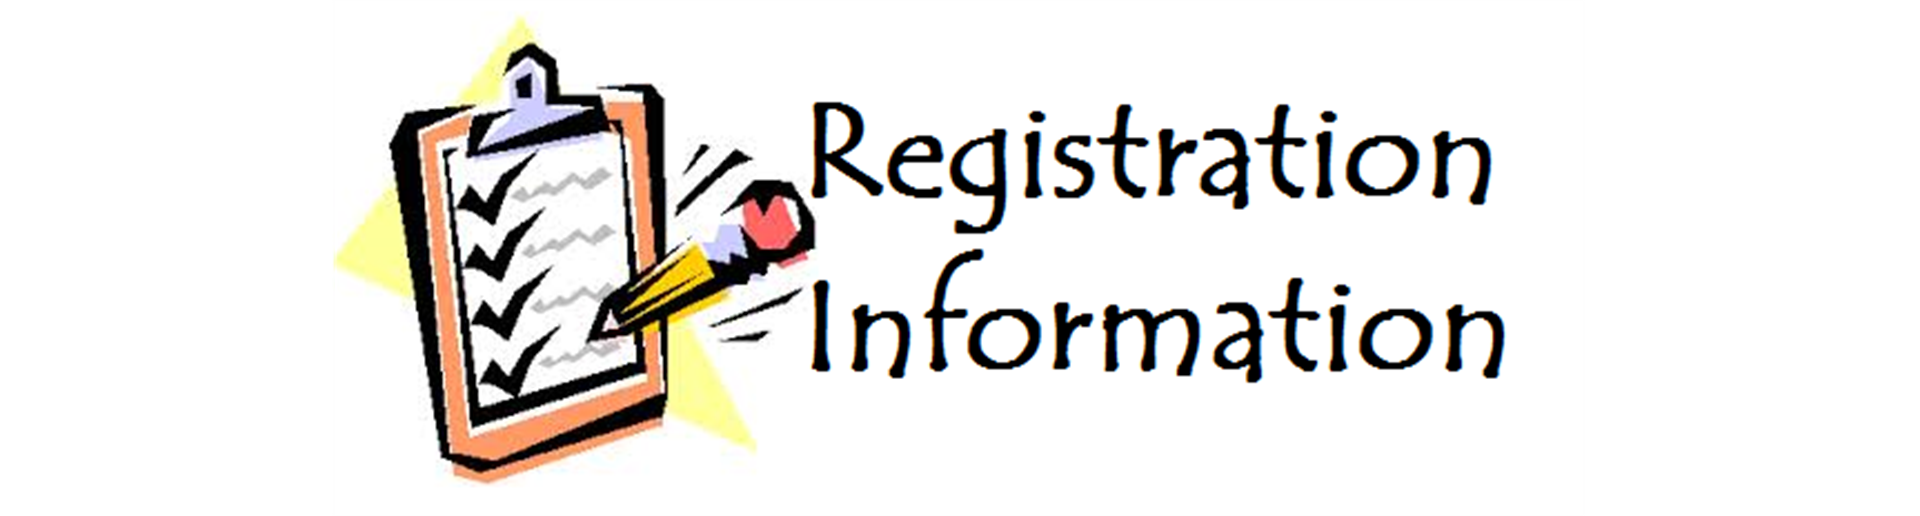 Registrations - See ORG Info